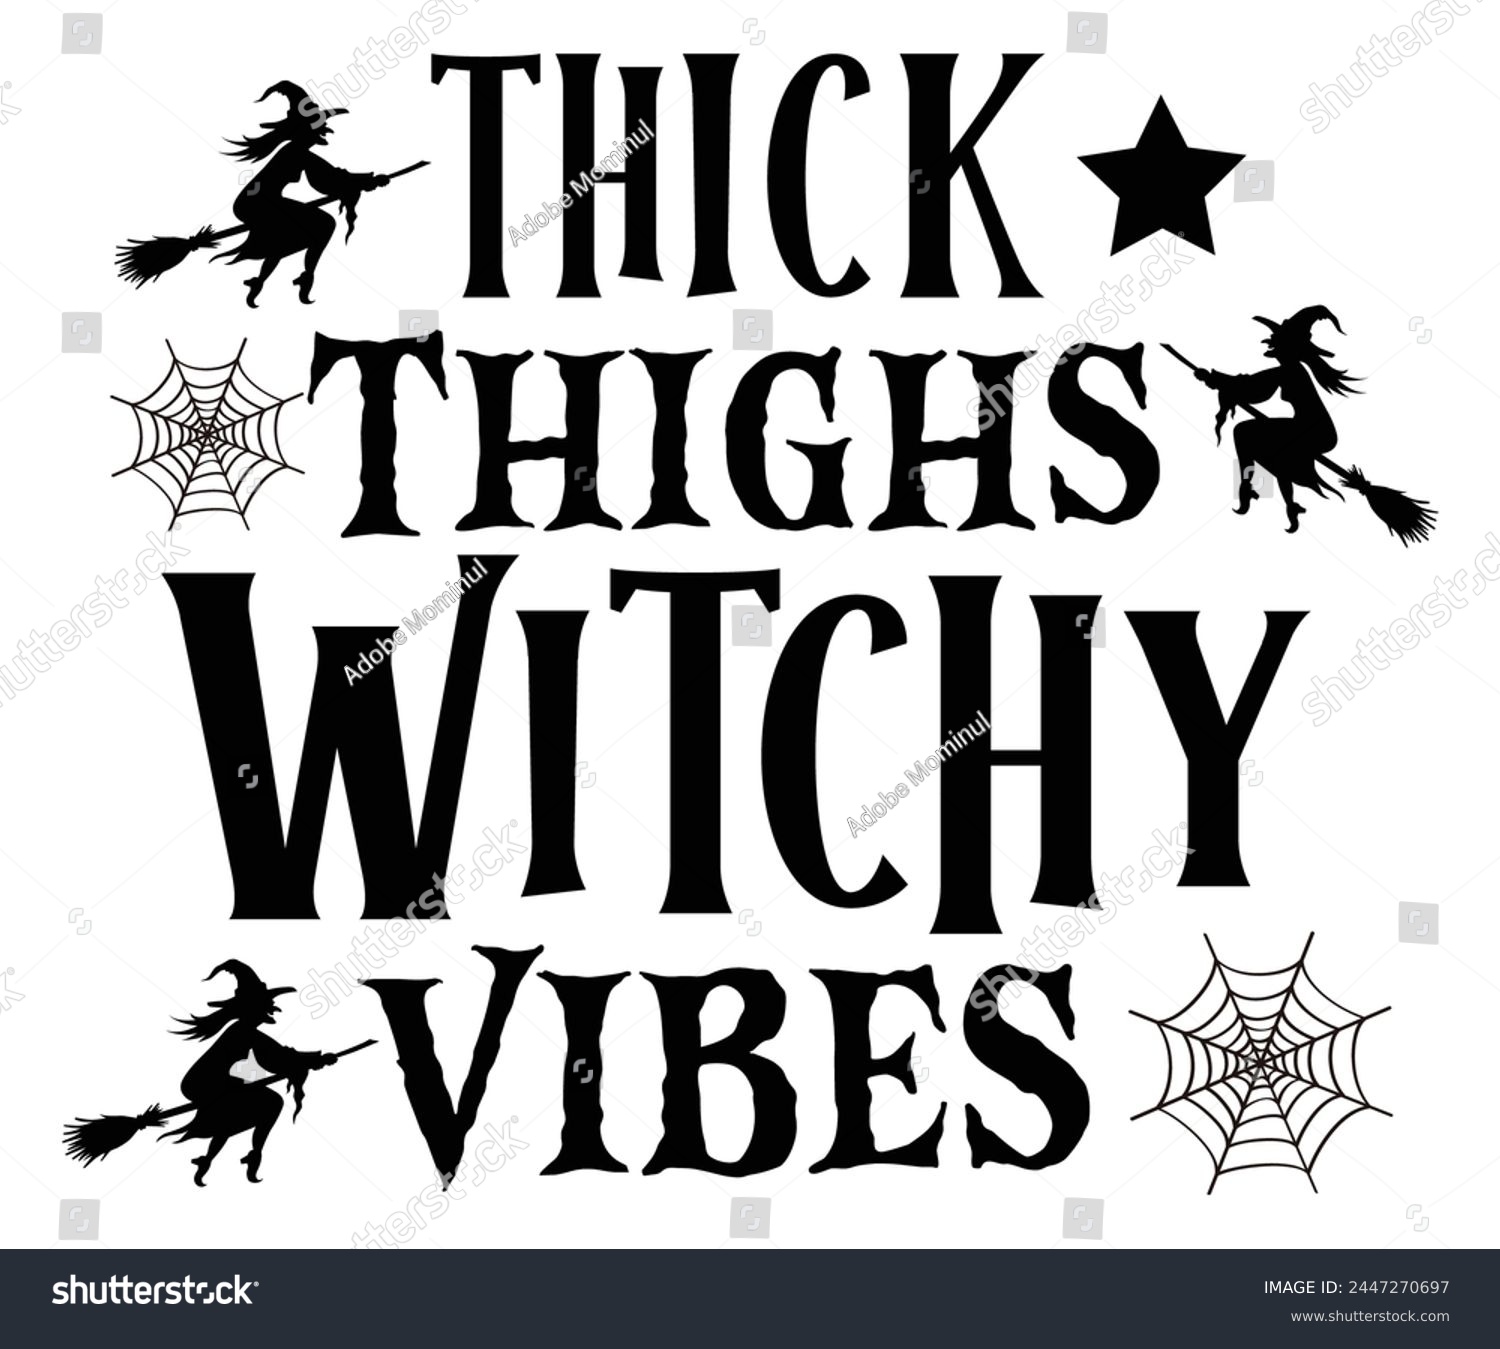 SVG of Thick Thighs Witch Vibes,Halloween Svg,Typography,Halloween Quotes,Witches Svg,Halloween Party,Halloween Costume,Halloween Gift,Funny Halloween,Spooky Svg,Funny T shirt,Ghost Svg,Cut file svg